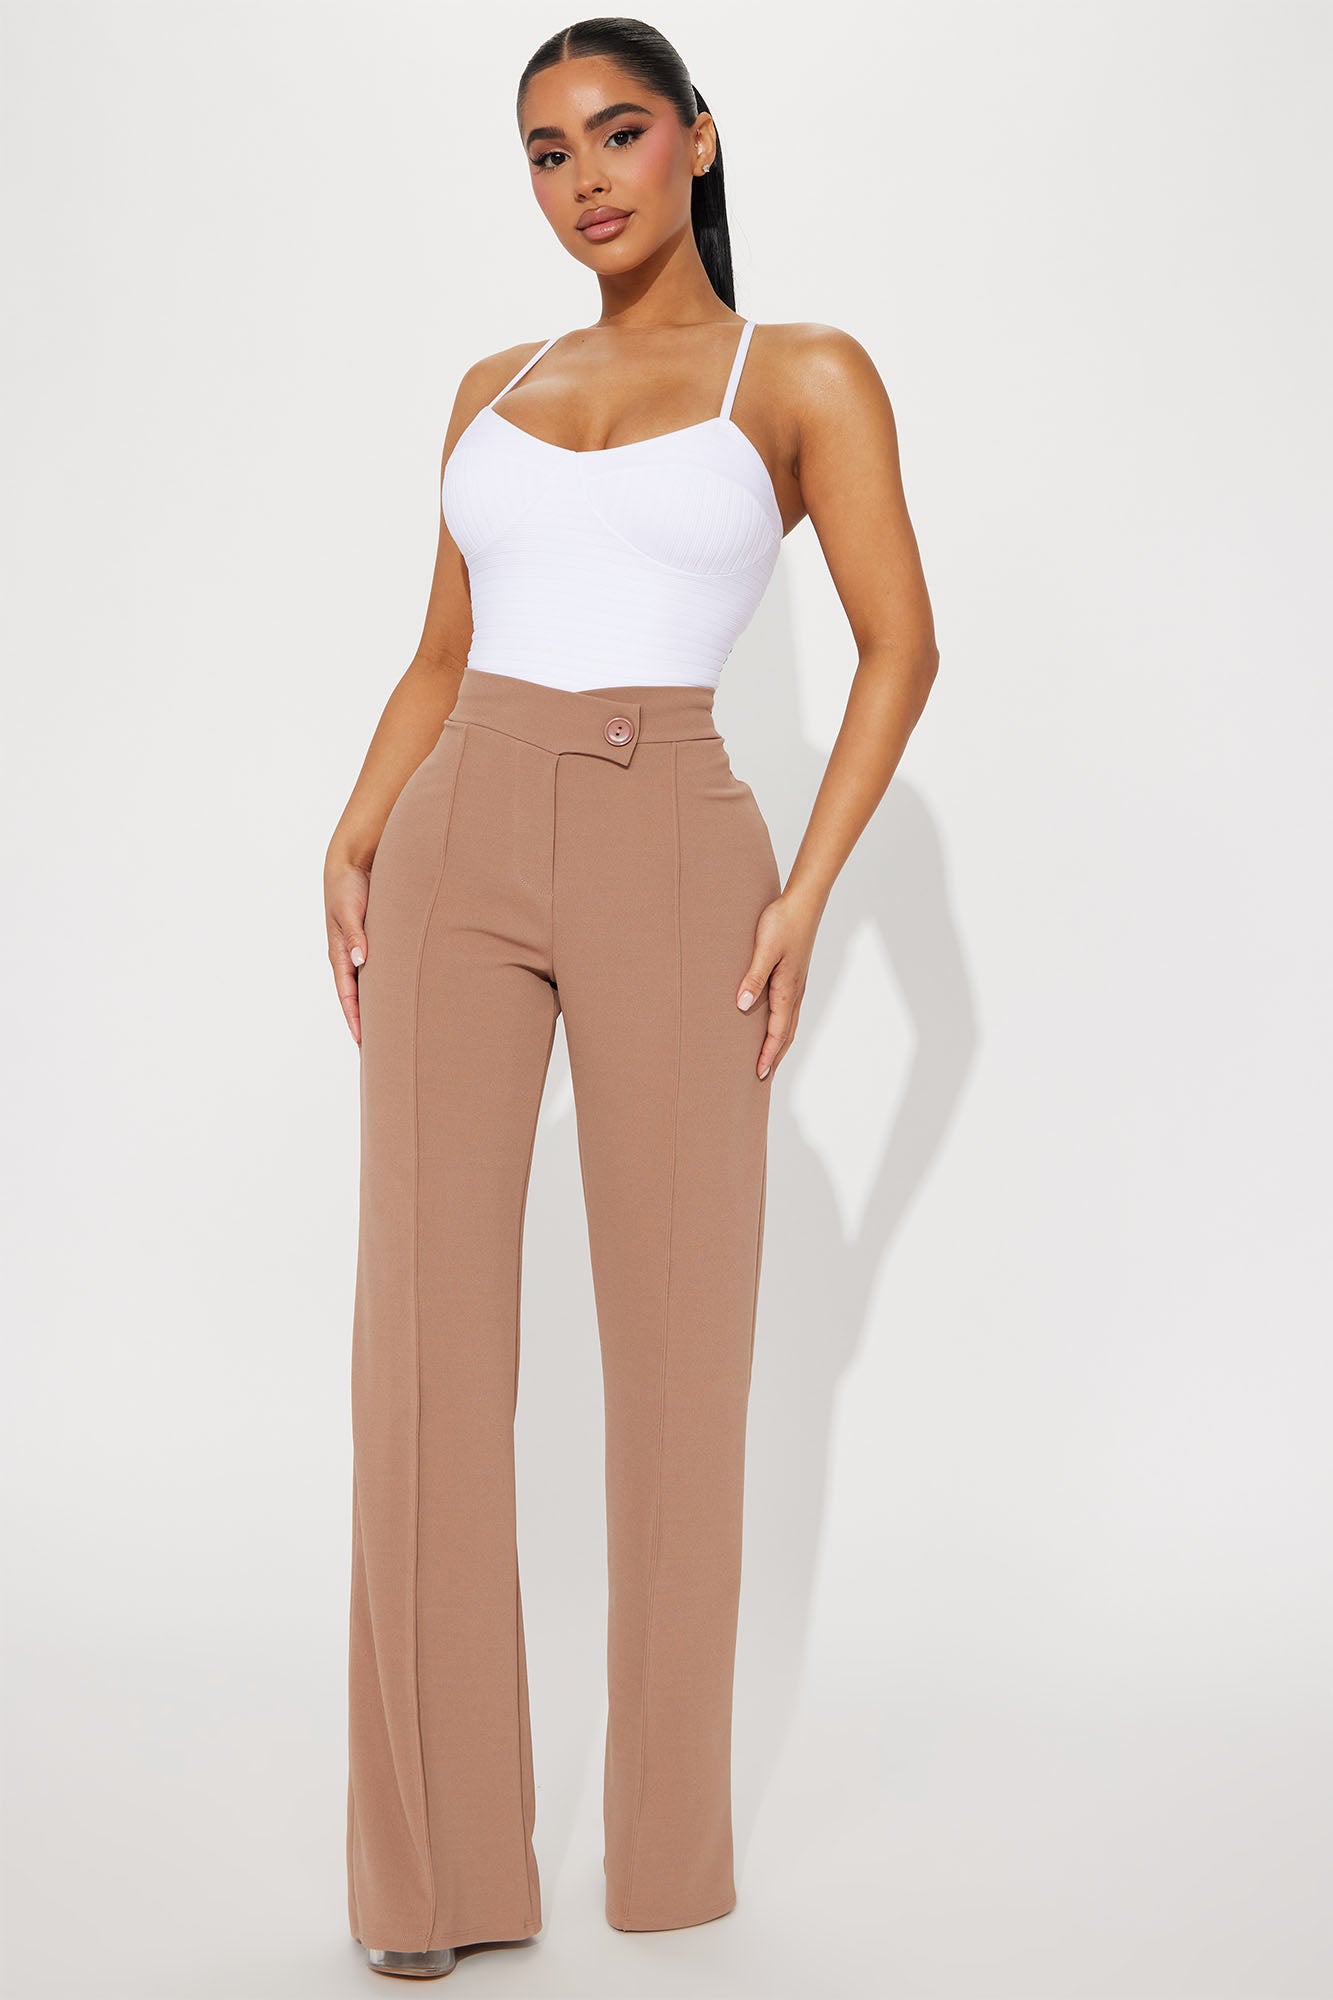 Petite Call It Even Wide Leg Dress Pants - Taupe